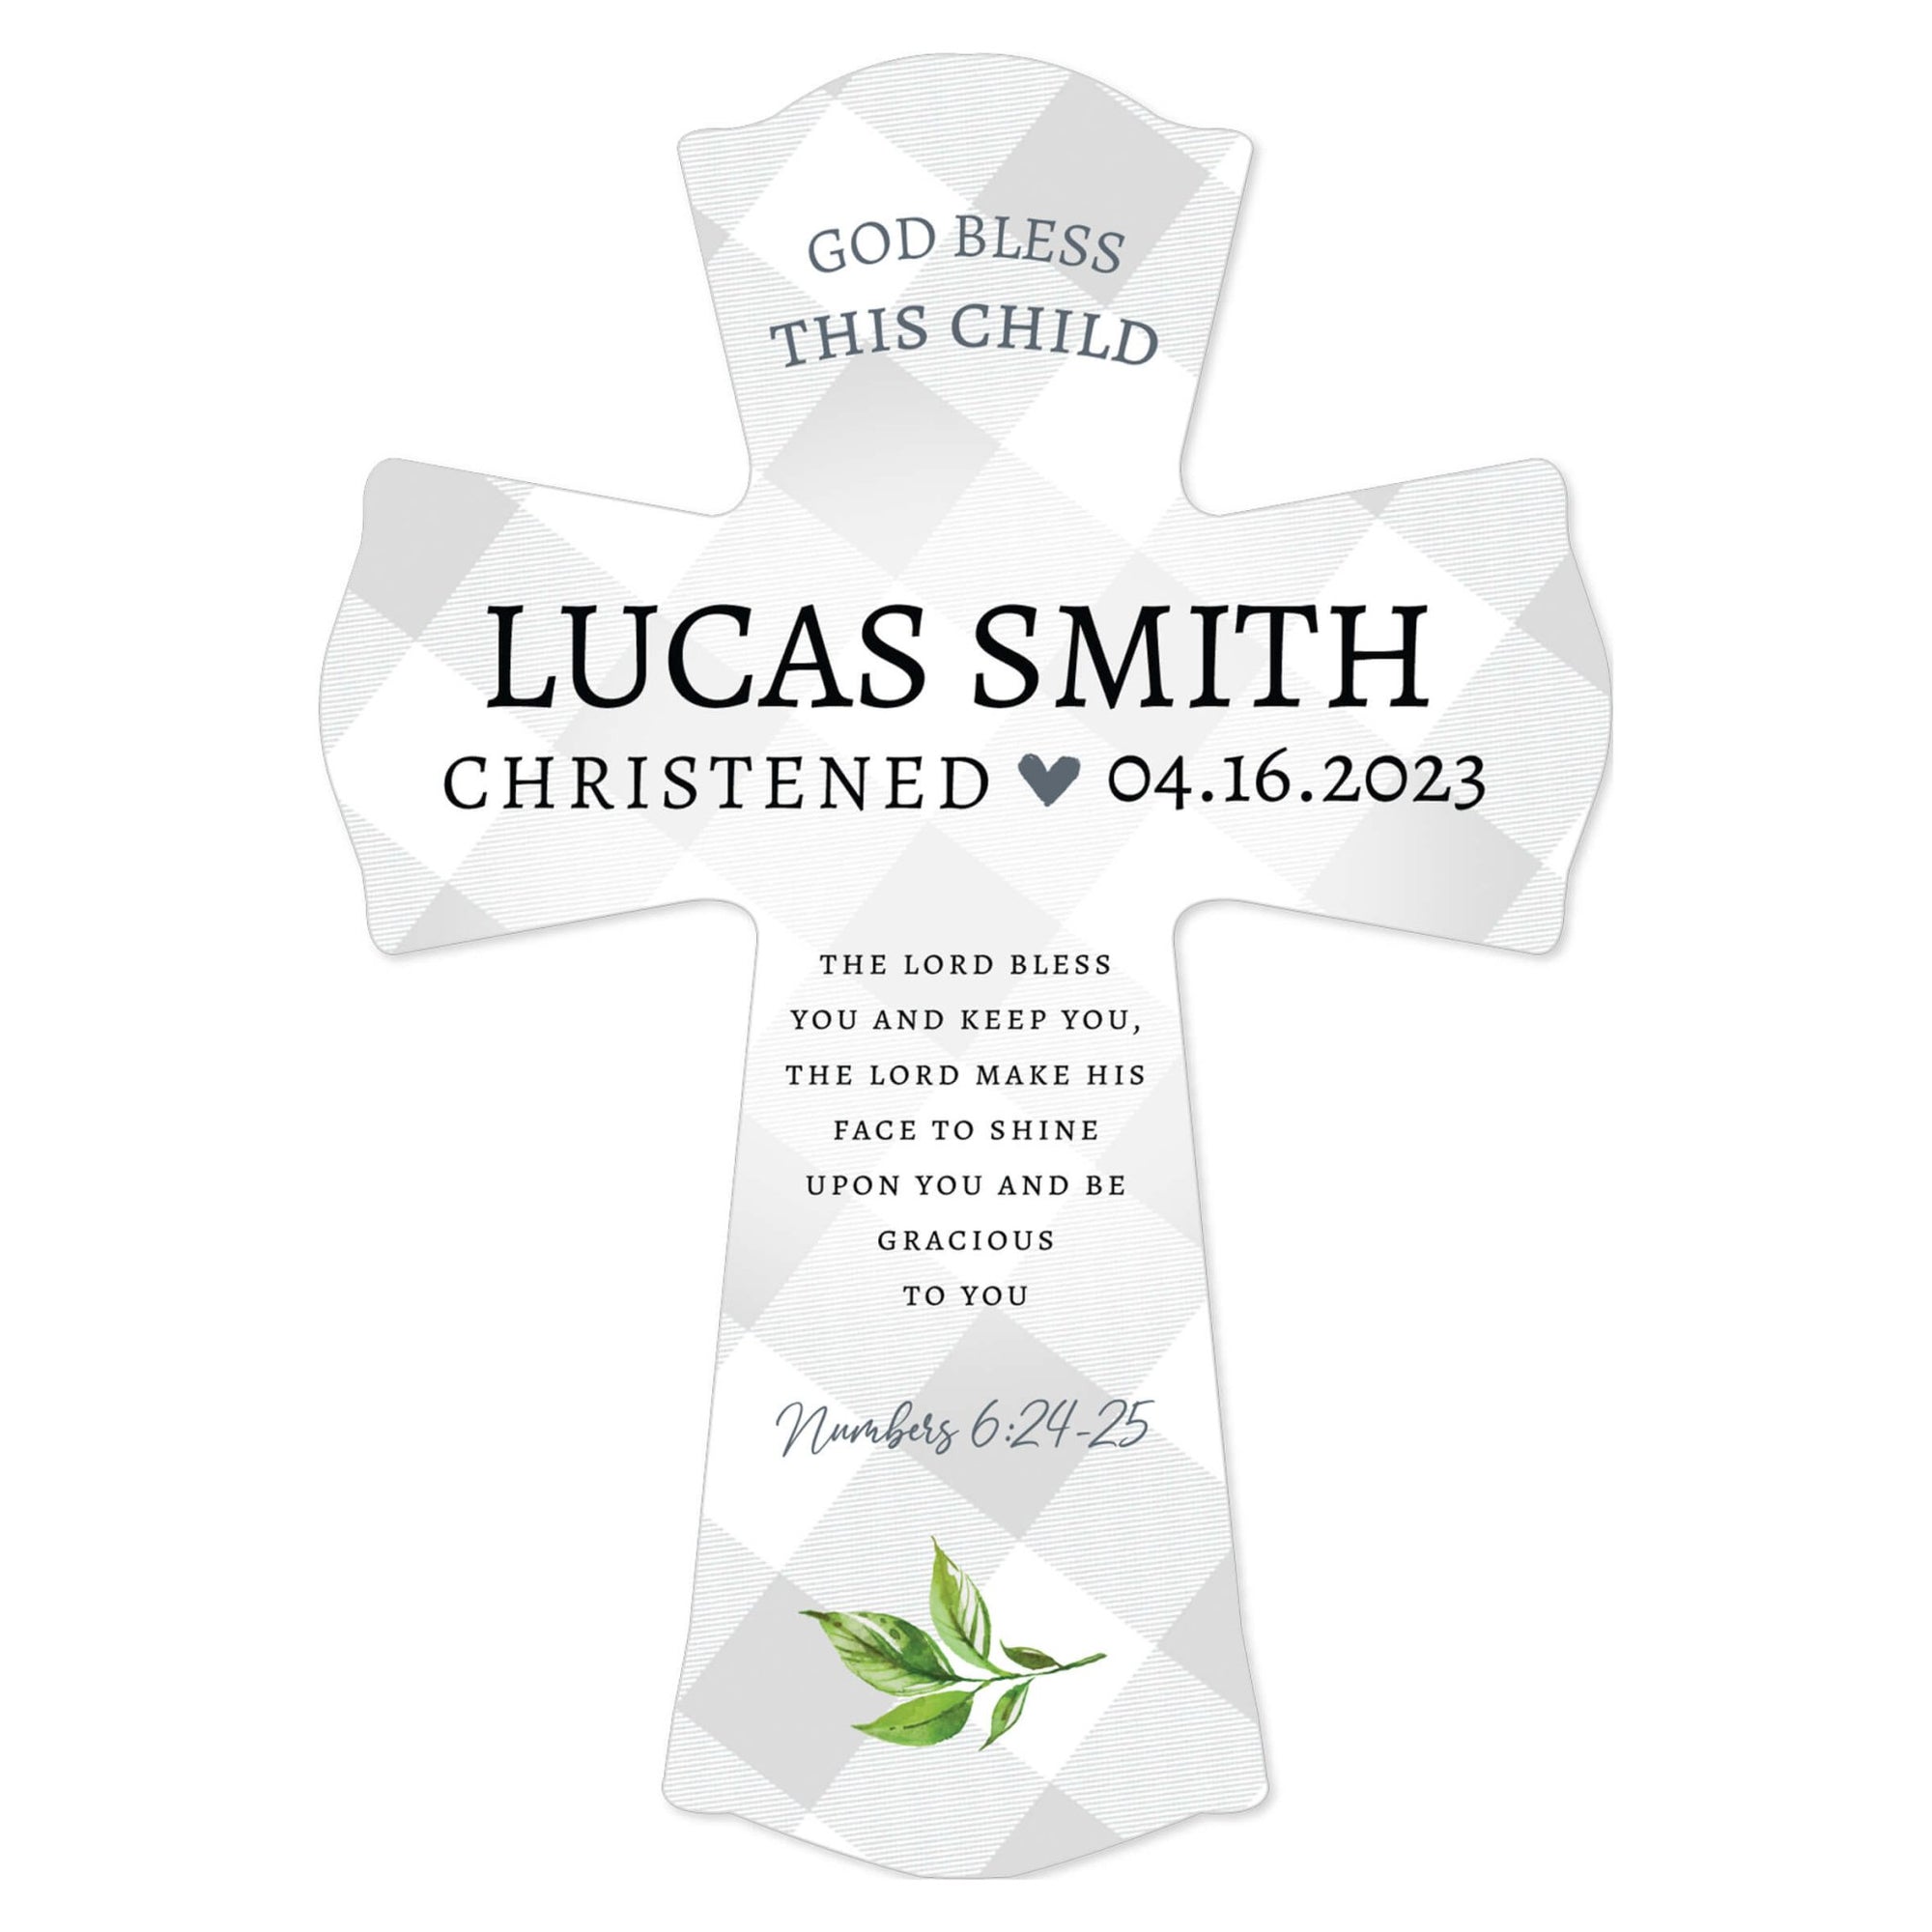 Personalized Wooden Cross for Christening Gifts - The Lord Bless - LifeSong Milestones